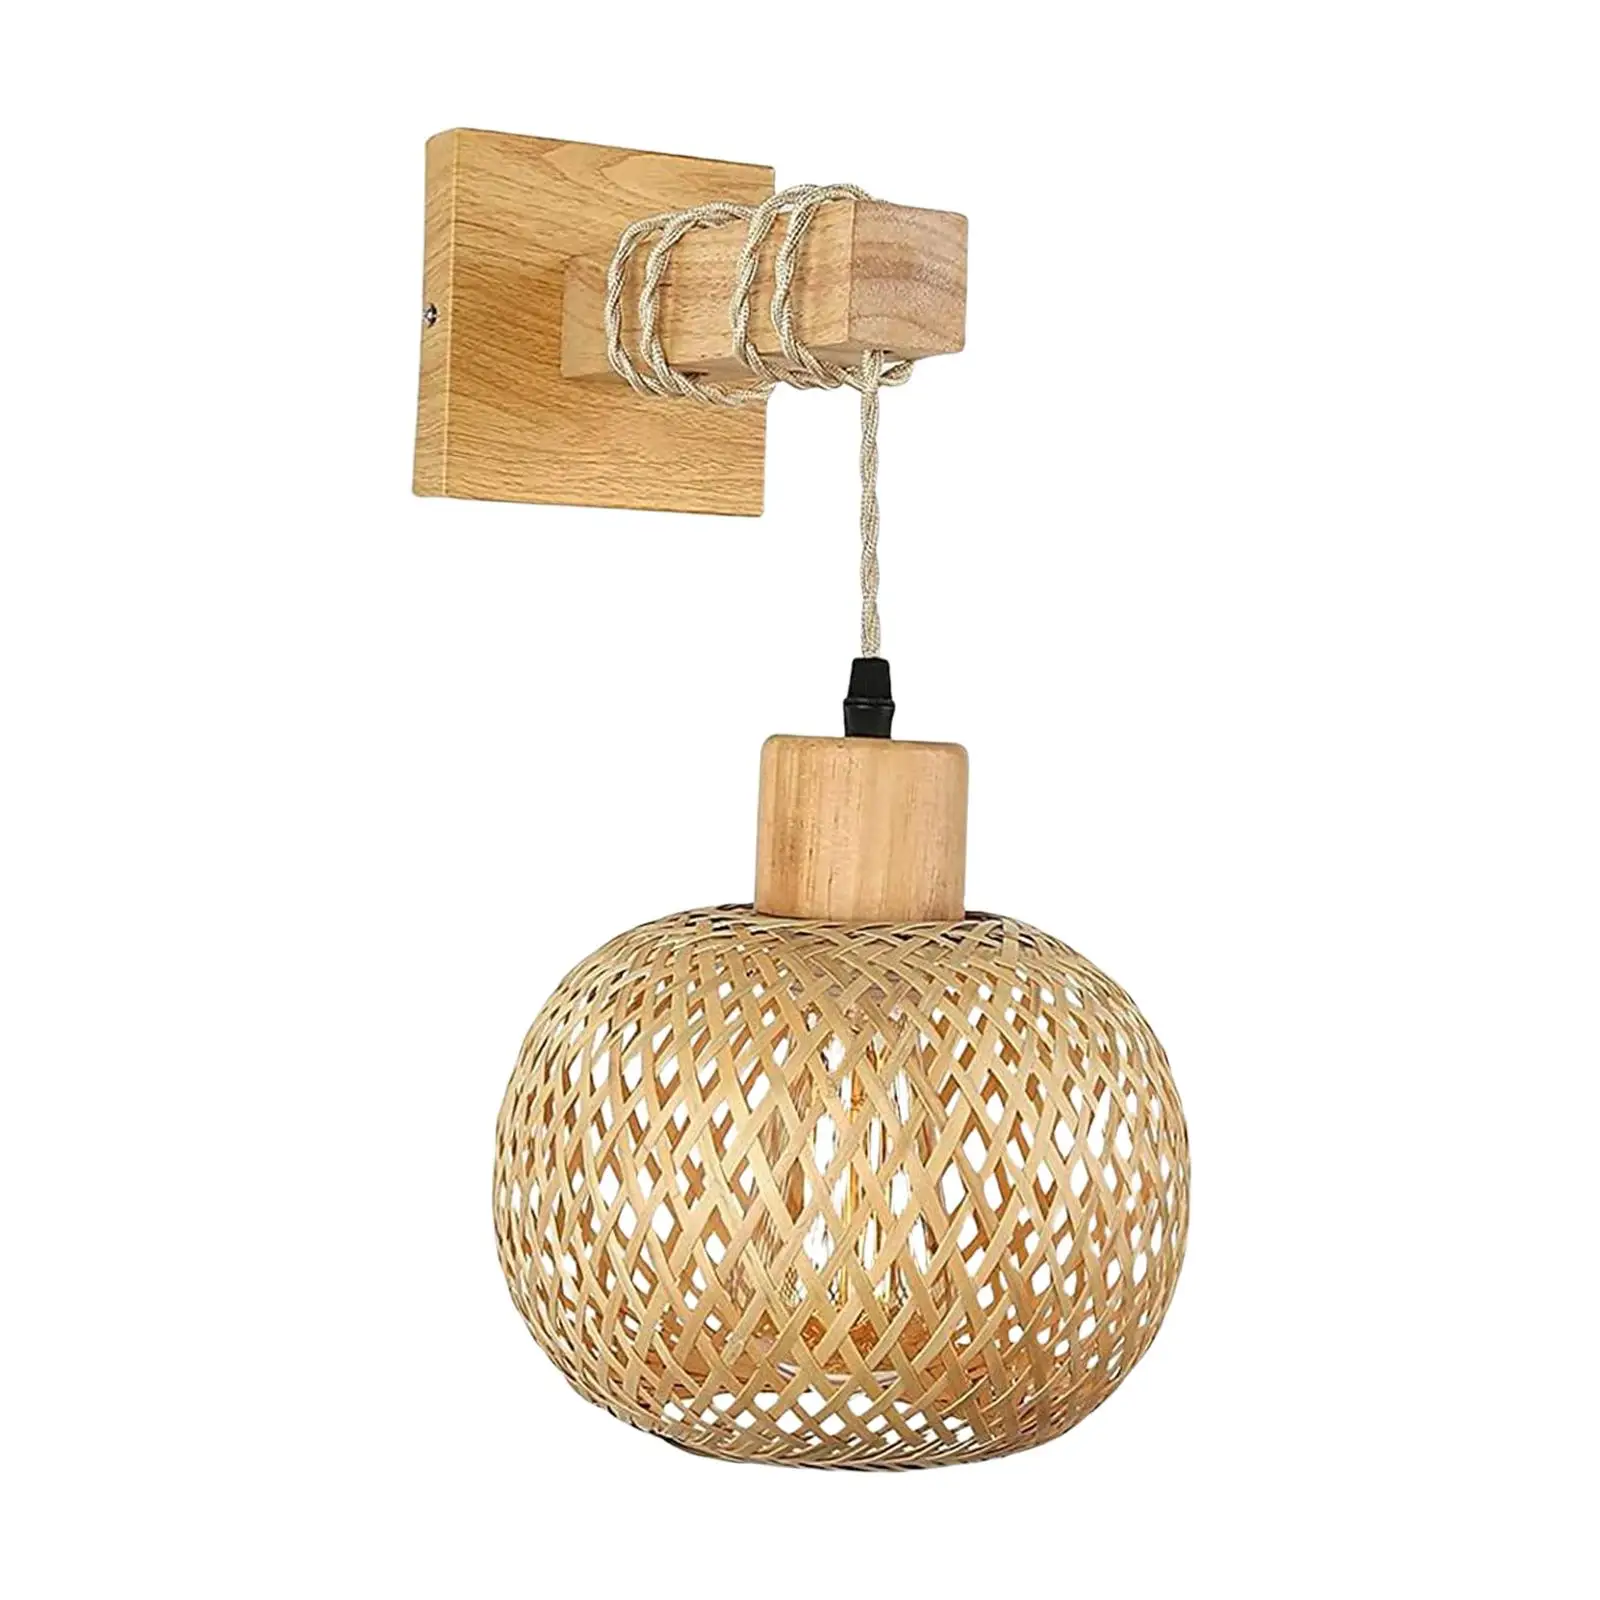 Rattan Wall Sconce Handmade Bamboo Woven for Living Room Bedroom Bedside